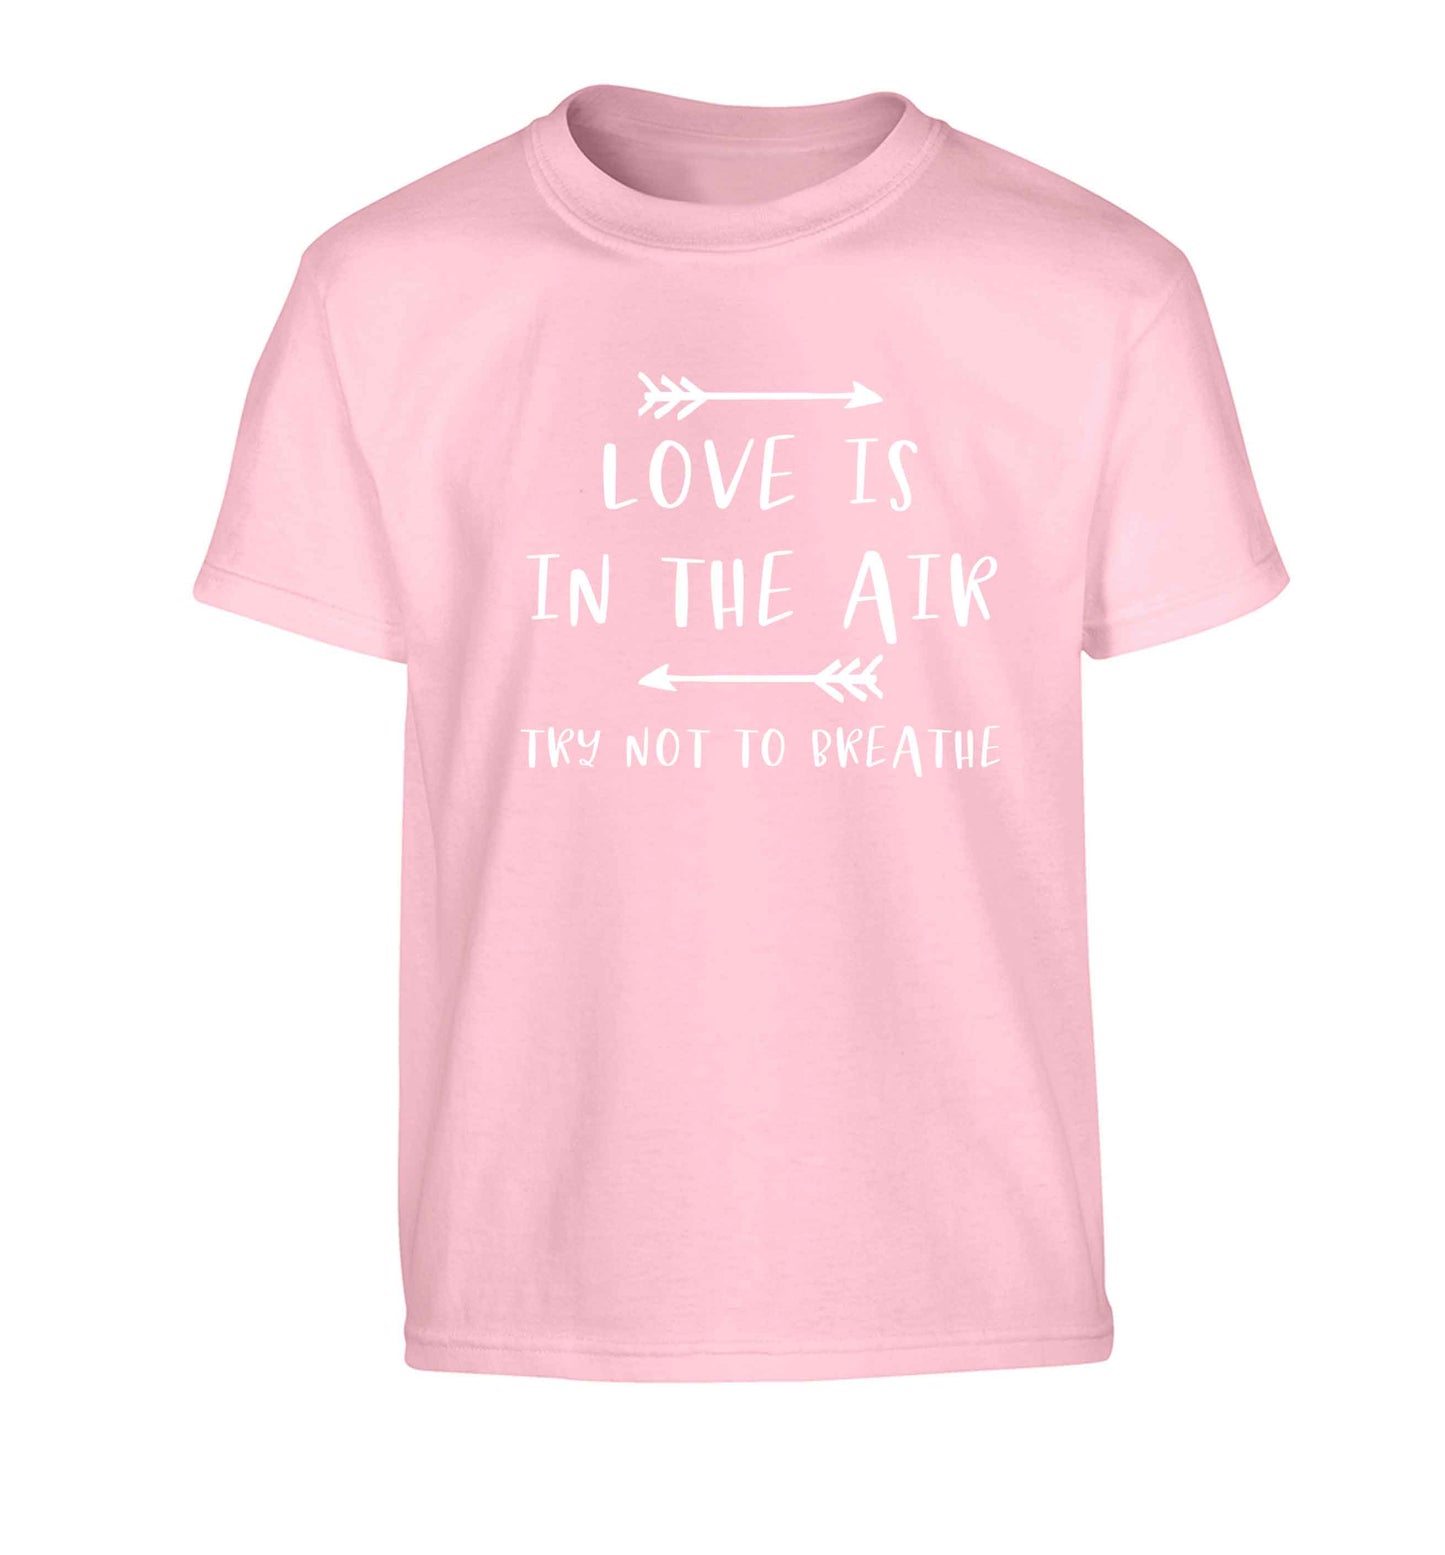 Love is in the air try not to breathe Children's light pink Tshirt 12-13 Years